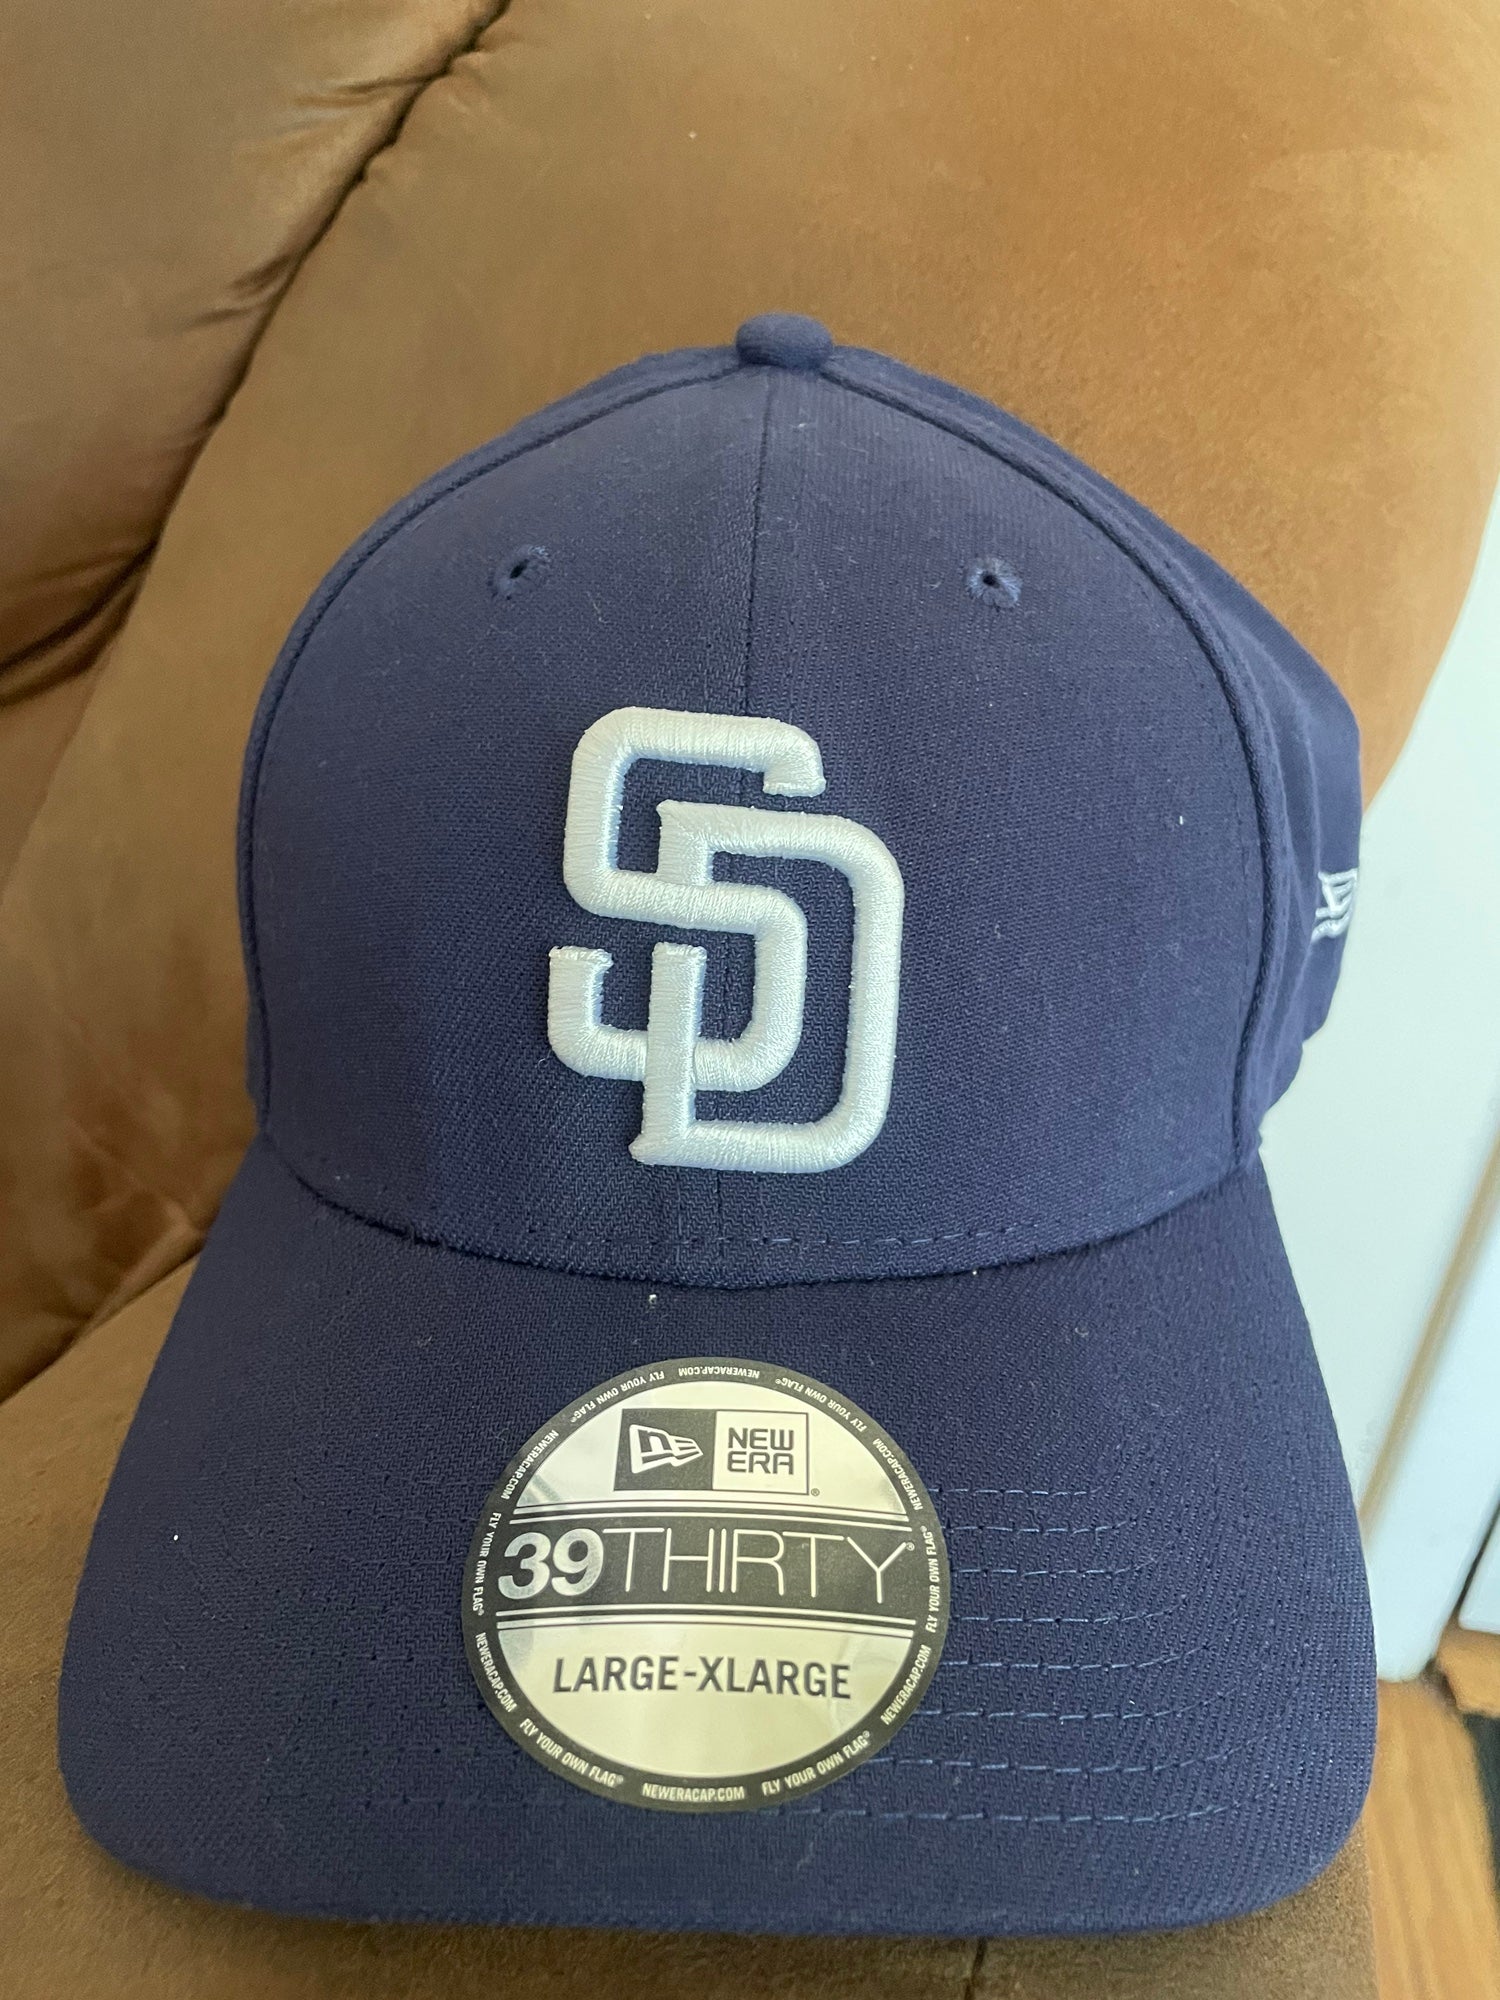 San Diego Padres New Era 9FIFTY Snapback Hat Cap Swinging Friar 2Tone –  Cowing Robards Sports